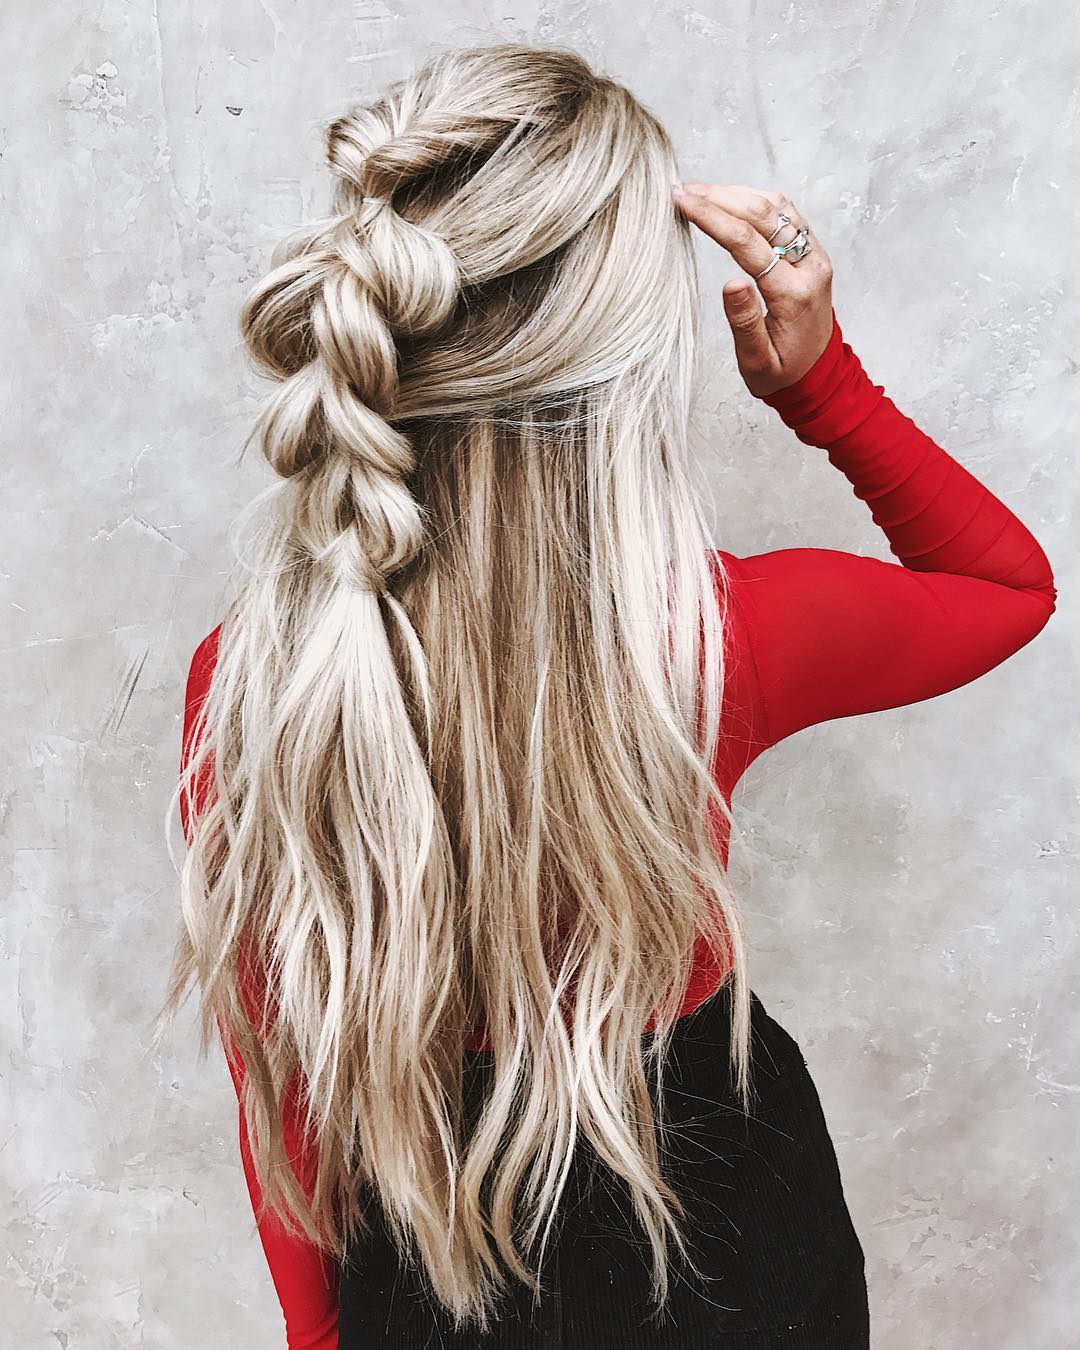 10 Messy Braided Long Hairstyle Ideas for Weddings & Vacations – Watch